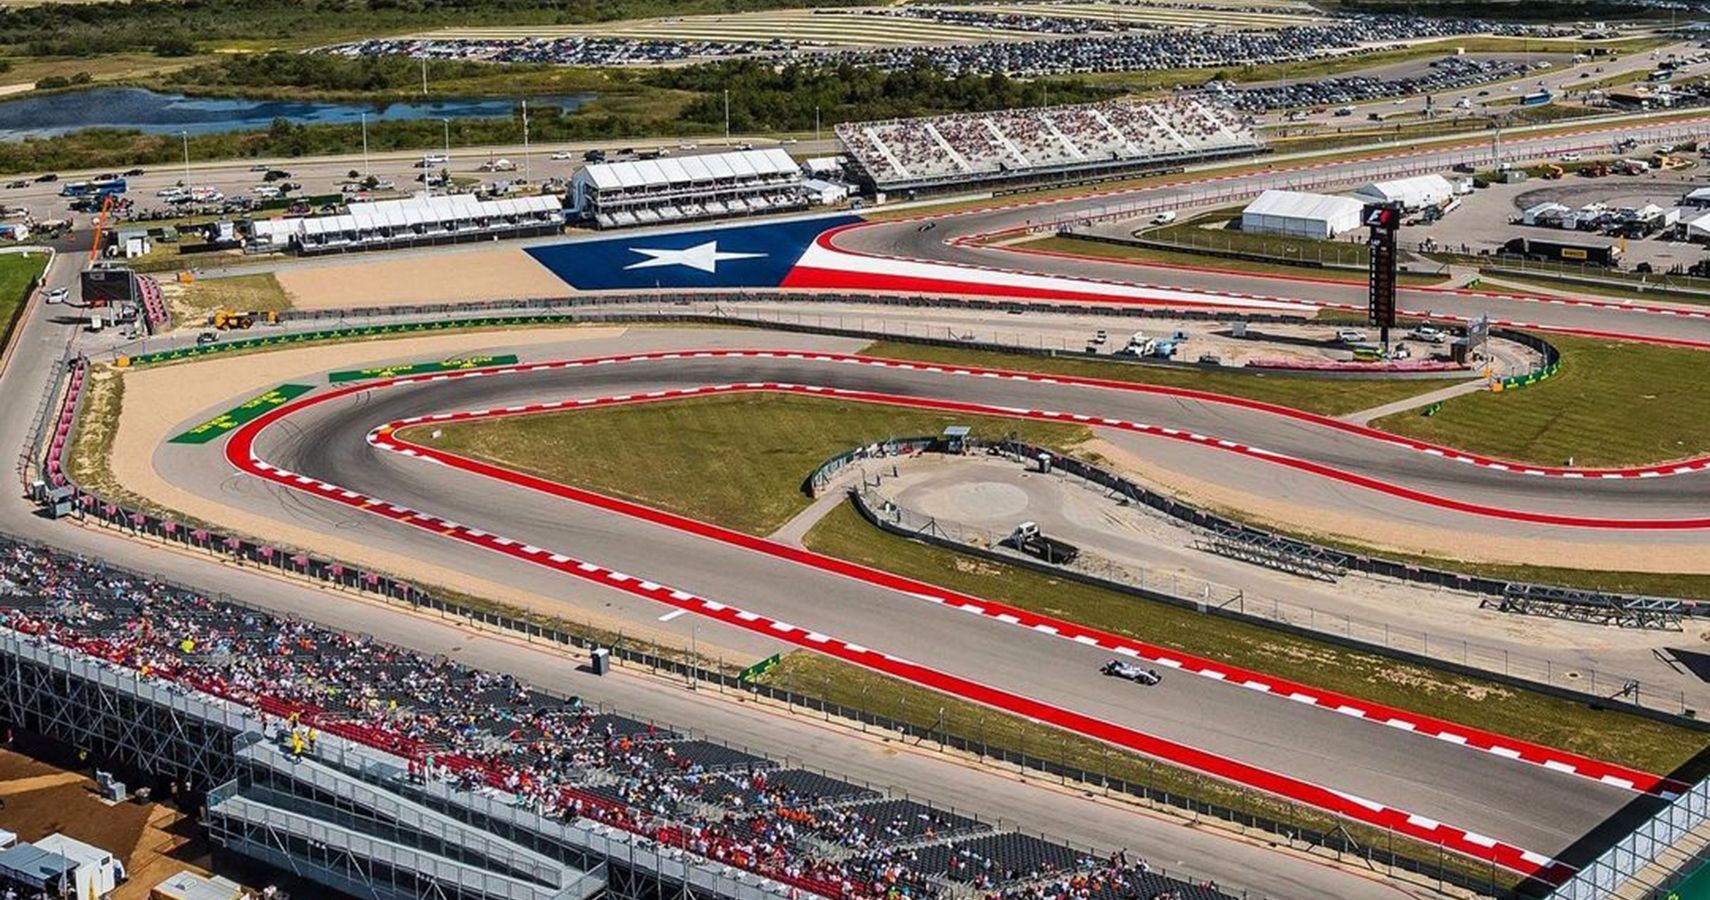 NASCAR To Use Original 3.4-Mile Course At Circuit of The Americas In Texas